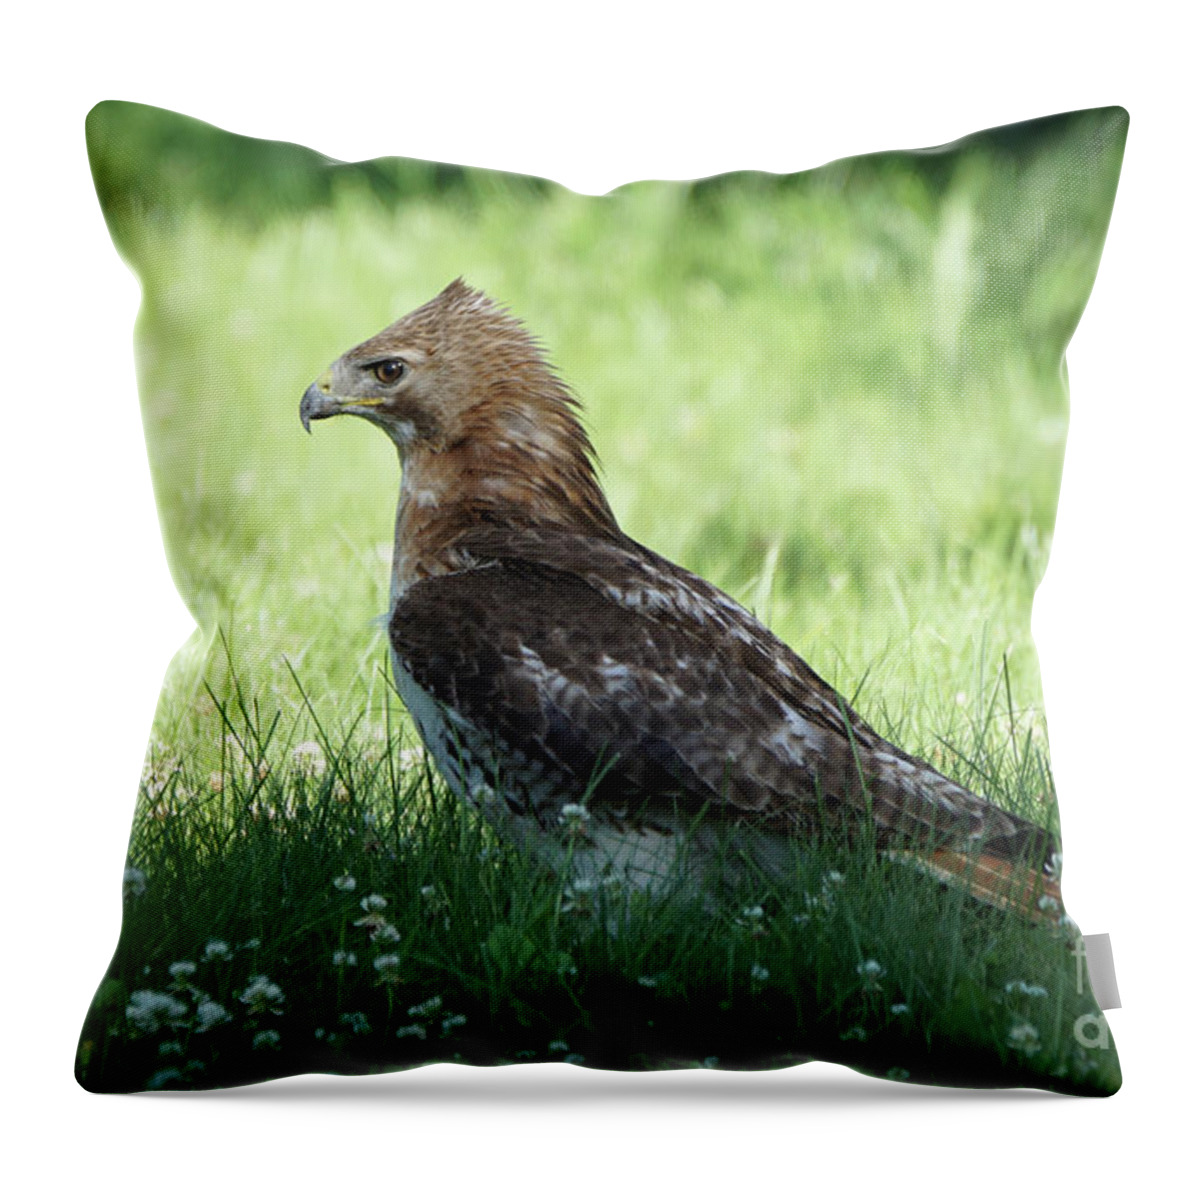 Hawk Throw Pillow featuring the photograph Hawk on the Ground 1 - Tight Grip on Dinner by Robert Alter Reflections of Infinity